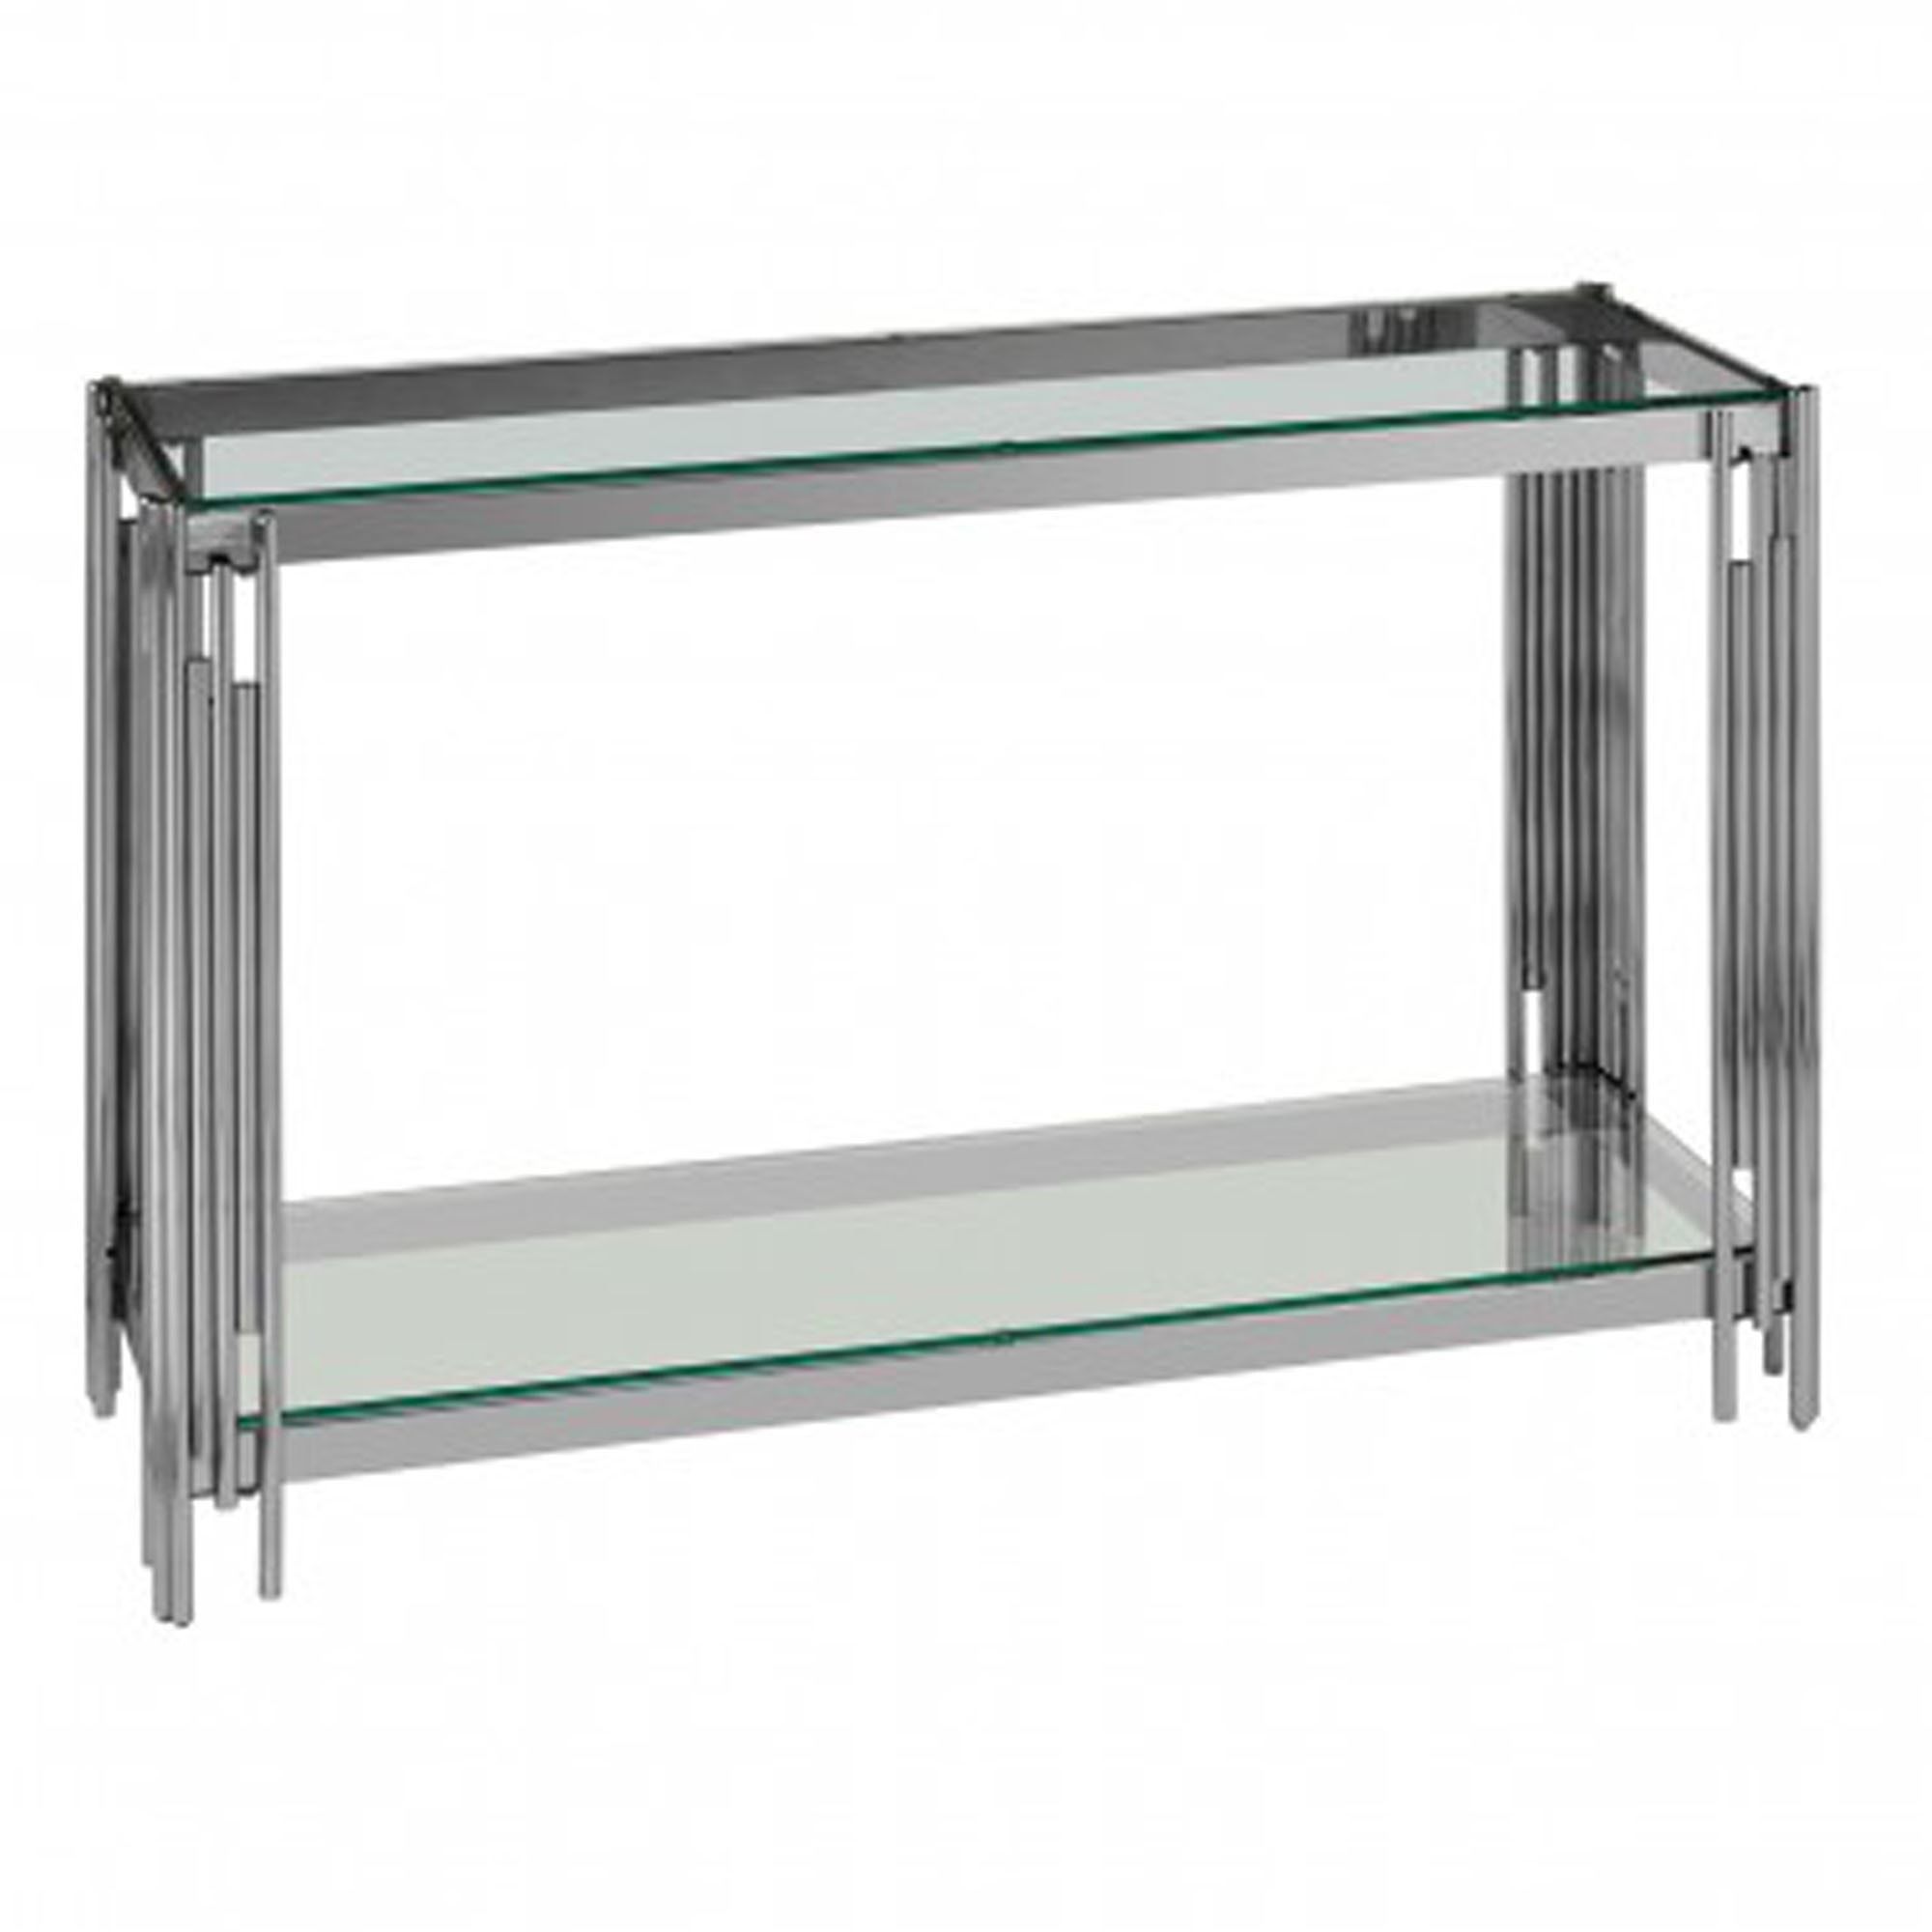 Alvaro Stainless Steel Console Table | Modern Console Tables For Stainless Steel Console Tables (Gallery 20 of 20)